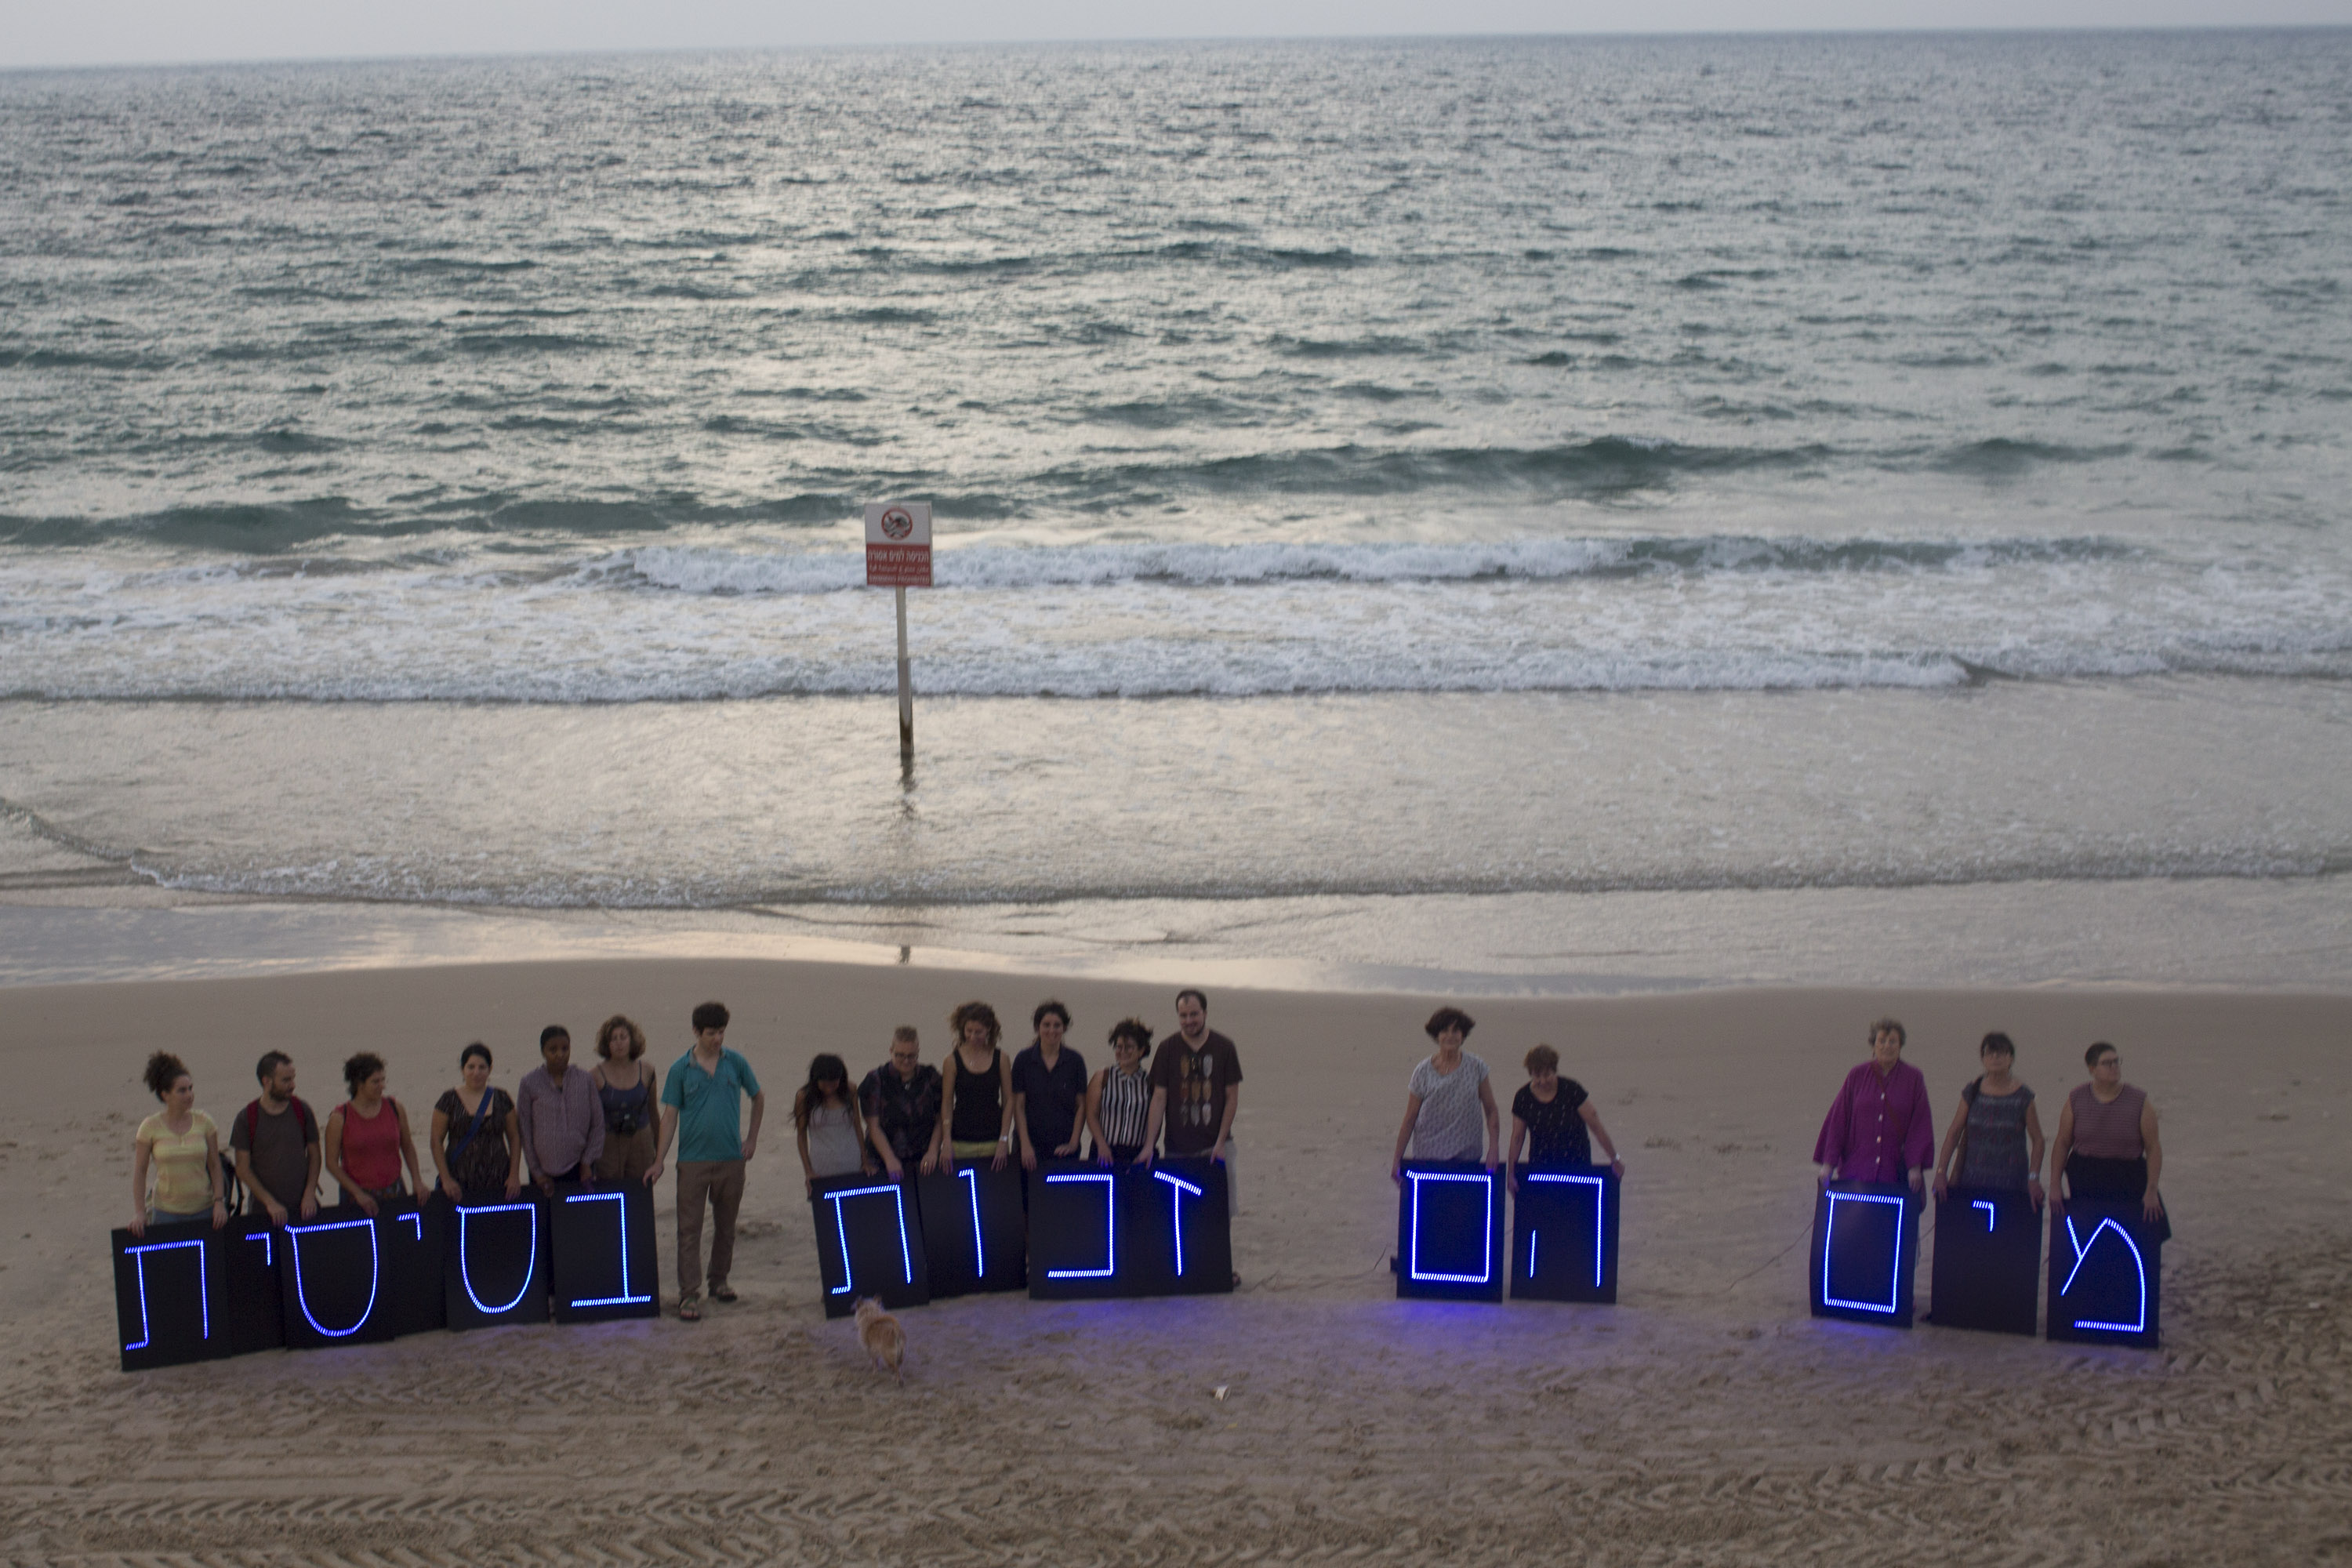 Israeli activists hold illuminated letters that spell out "Water is a basic right" as part of an international light installation coordinated by the "Water Coalition," calling for equal water rights for Palestinians, August 14, 2016. (Oren Ziv/Activestills.org)